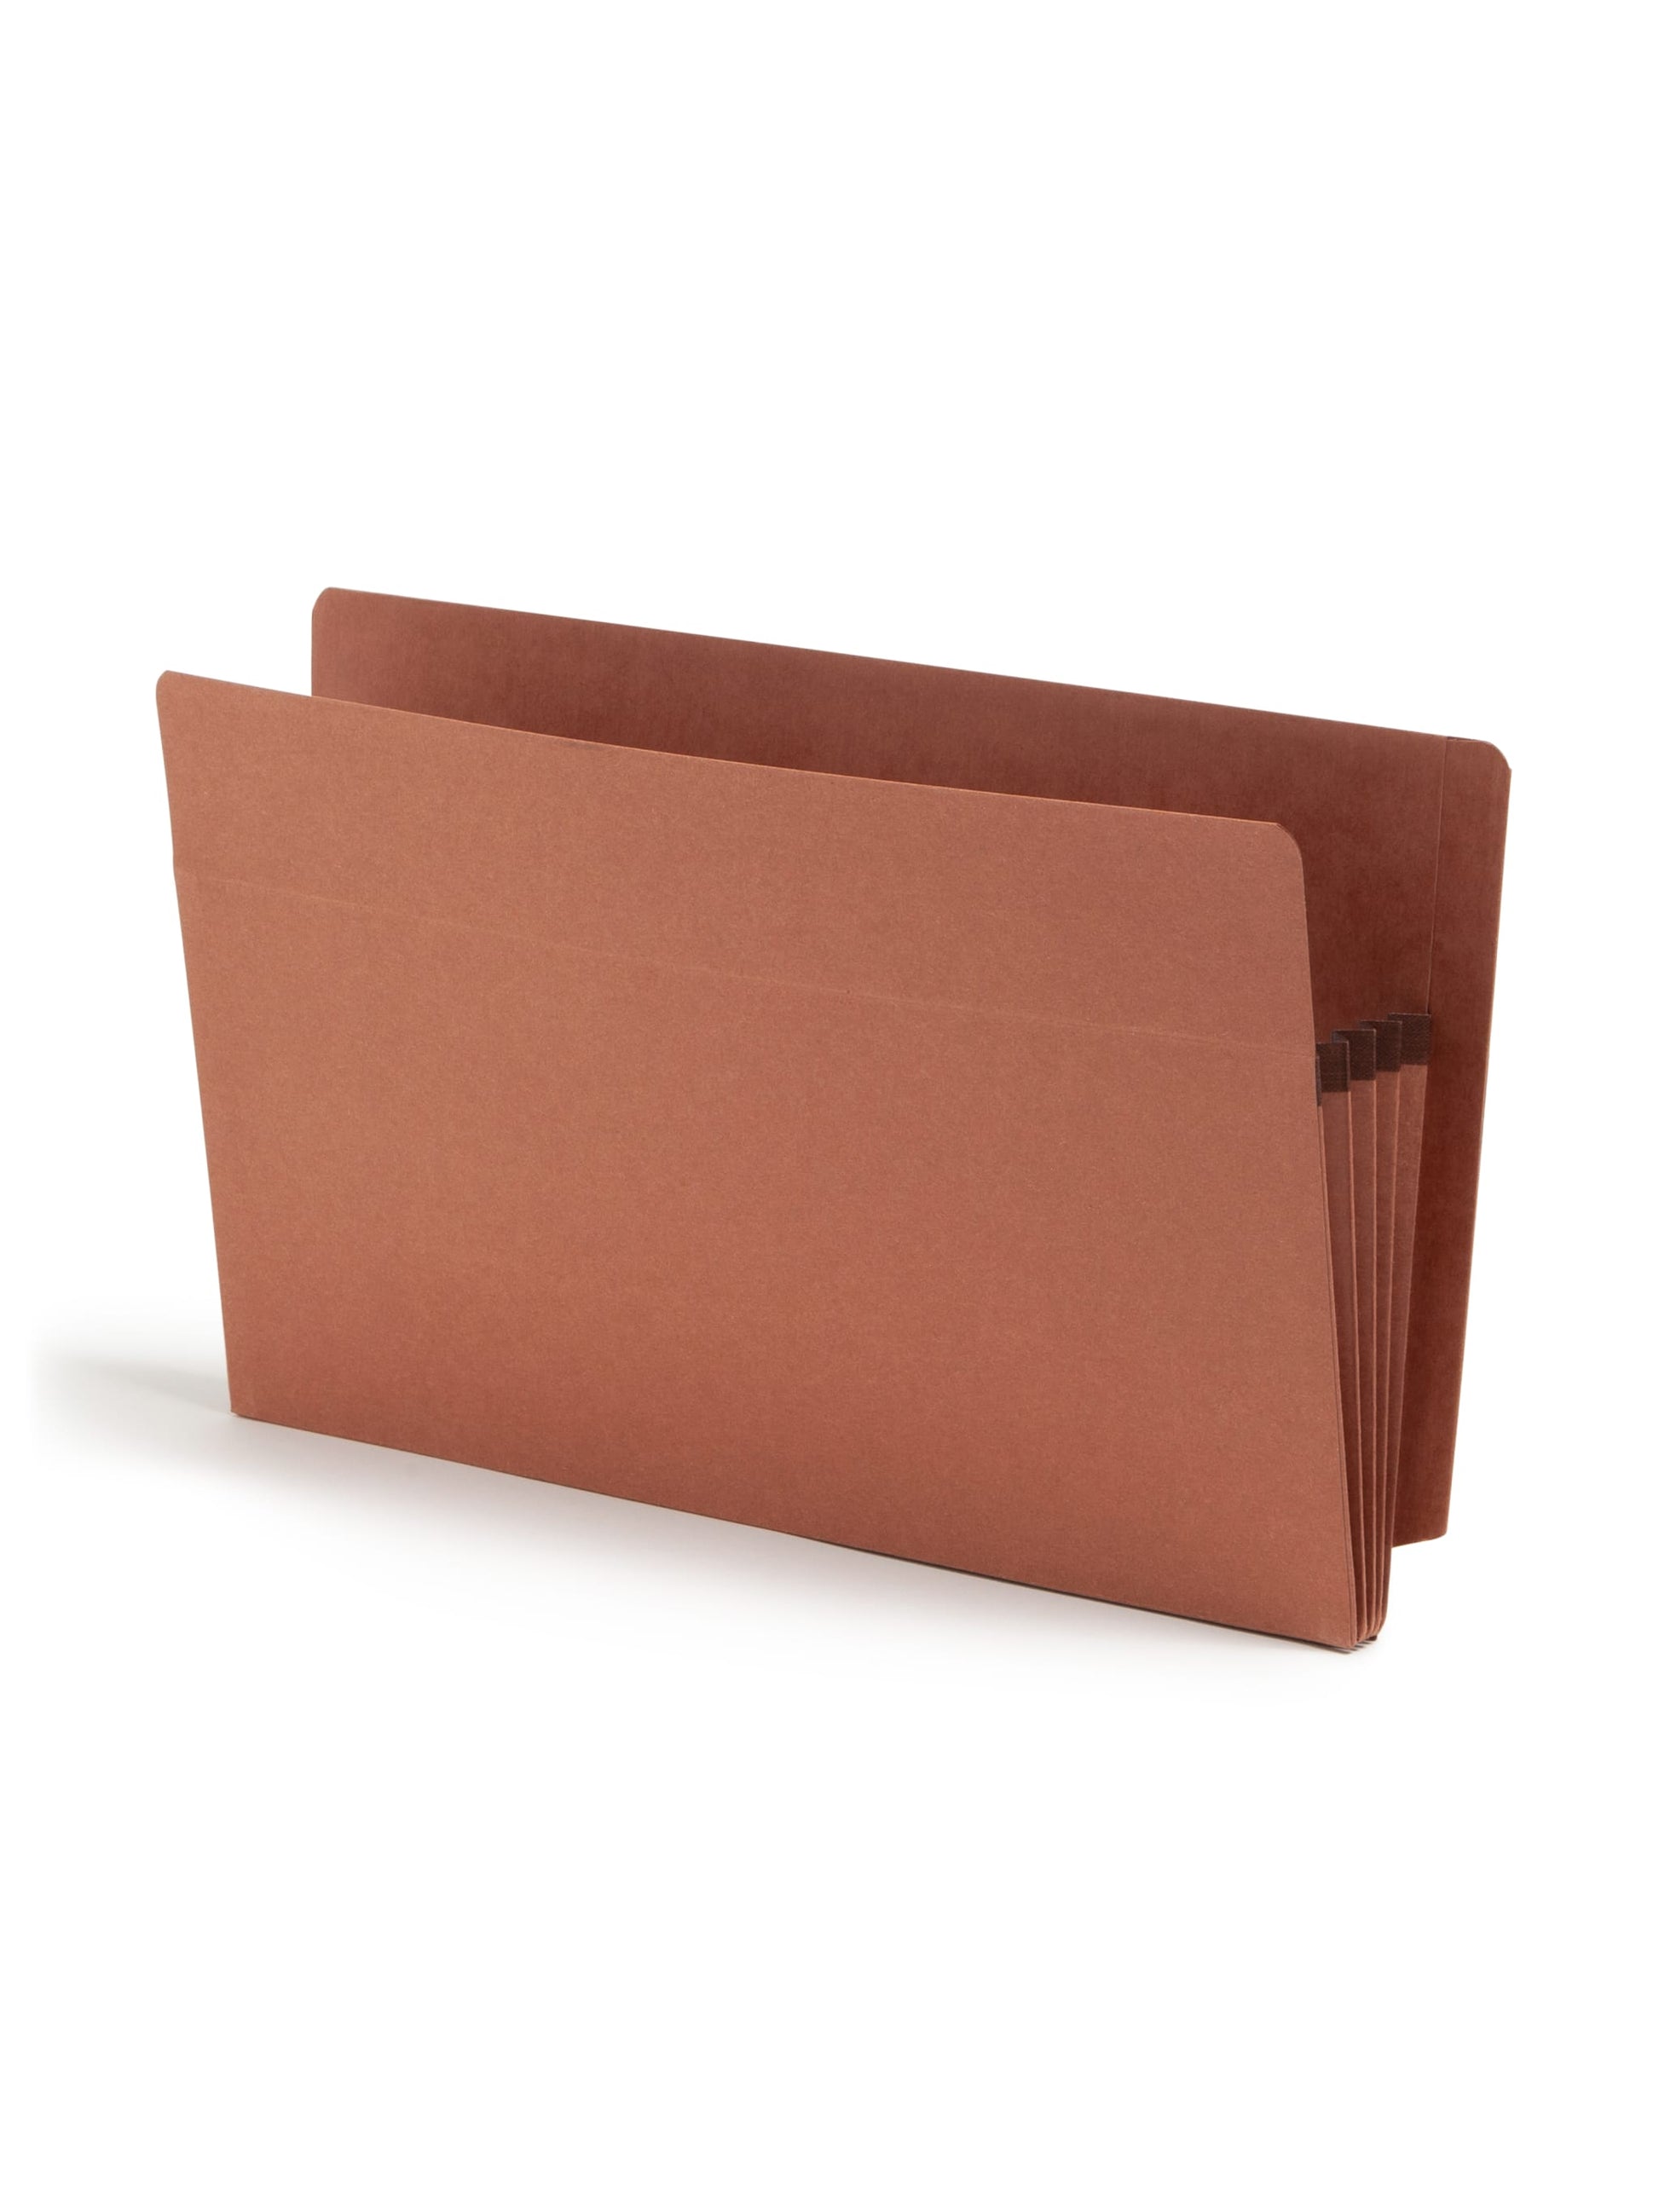 Etra-Wide End Tab File Pockets, Straight-Cut Tab, 3-1/2 inch Expansion, Redrope Color, Extra Wide Legal Size, Set of 0, 30086486736115